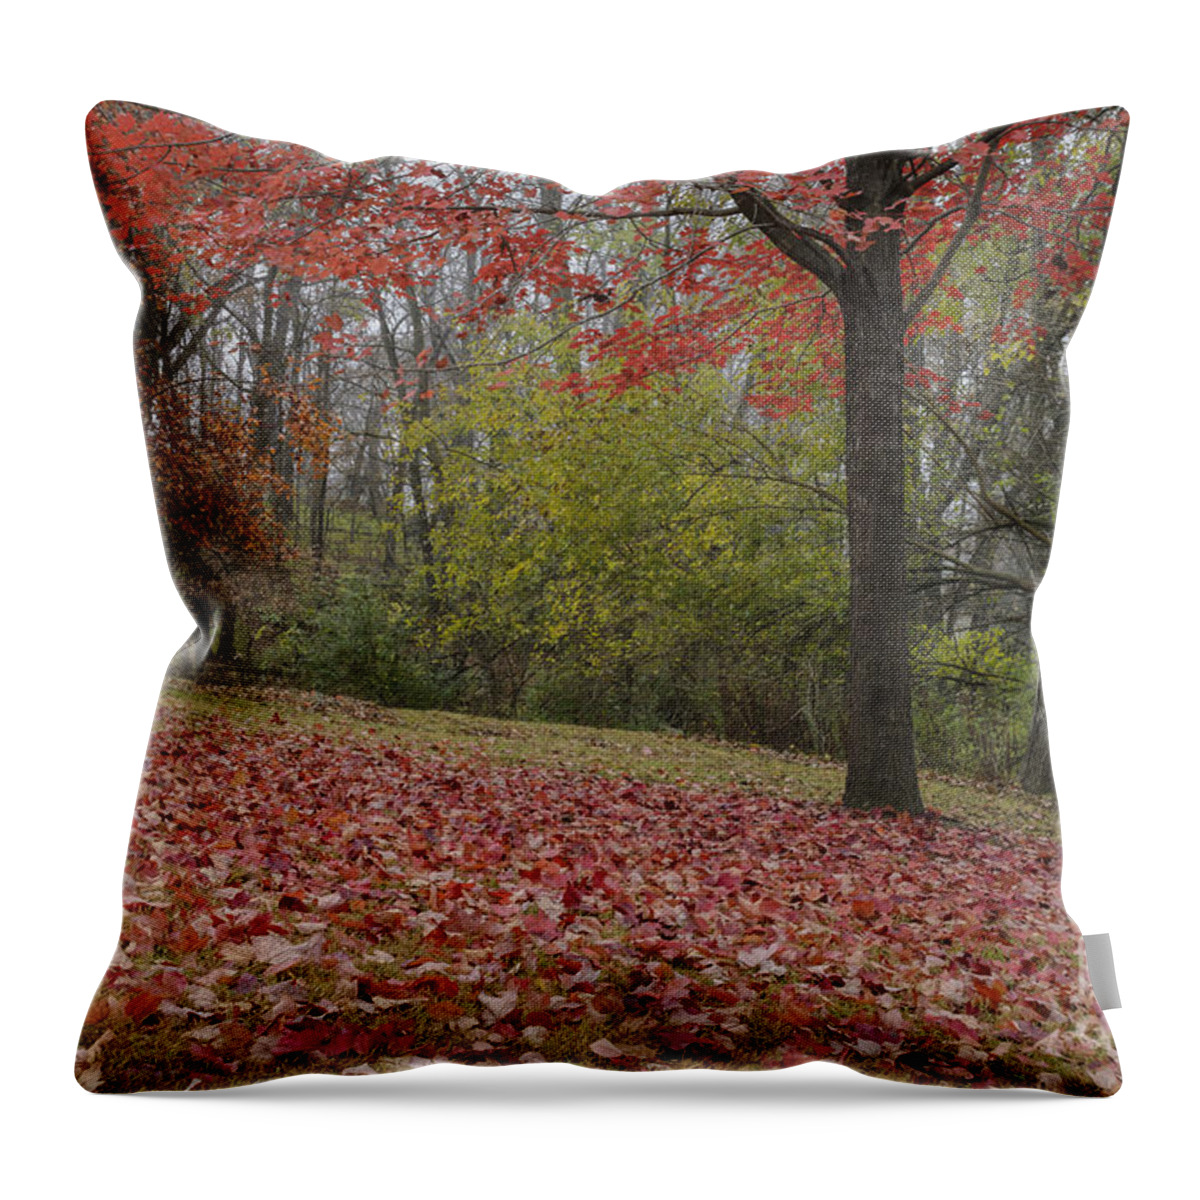 Red Maple Tree Throw Pillow featuring the photograph Bright Red Maple Tree by Tamara Becker